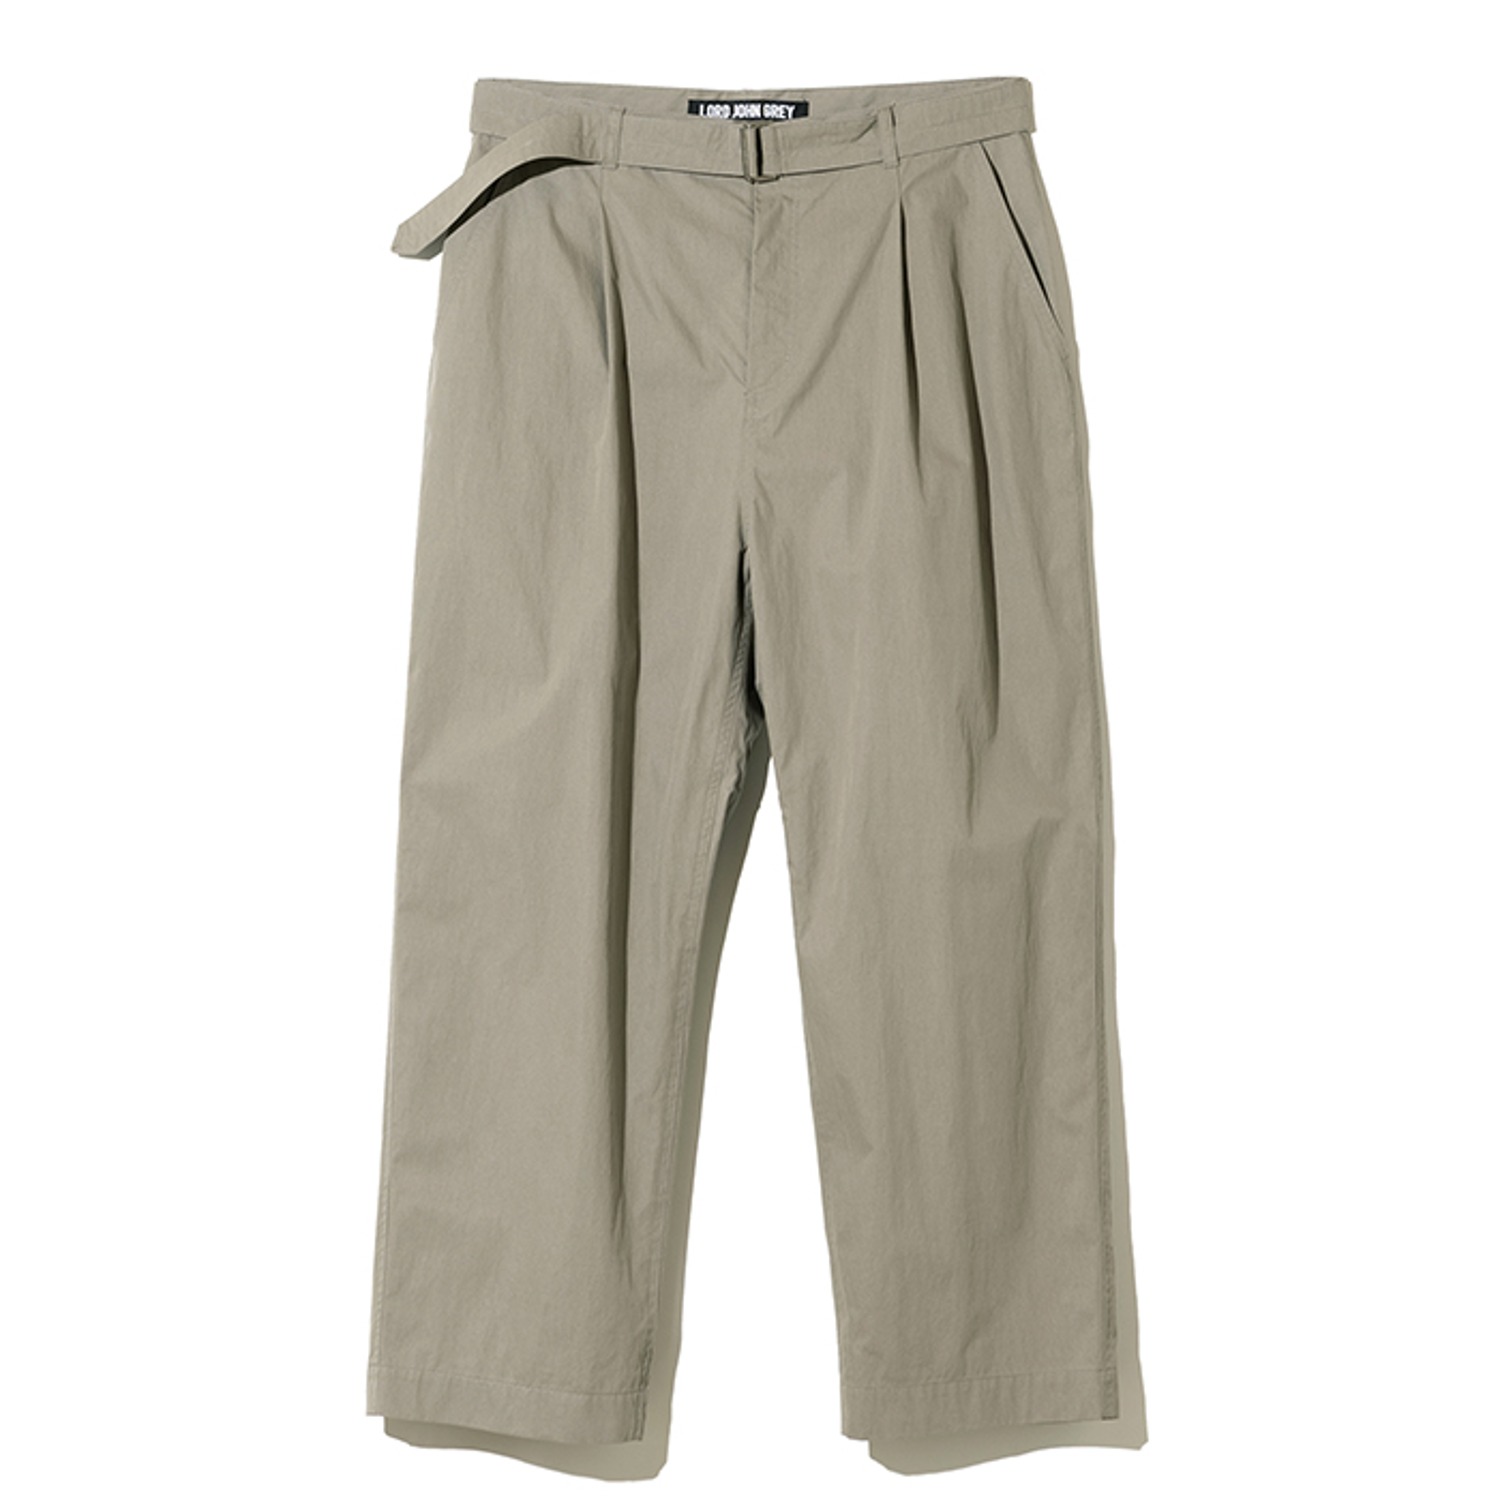 belted wide cotton pants grey beige